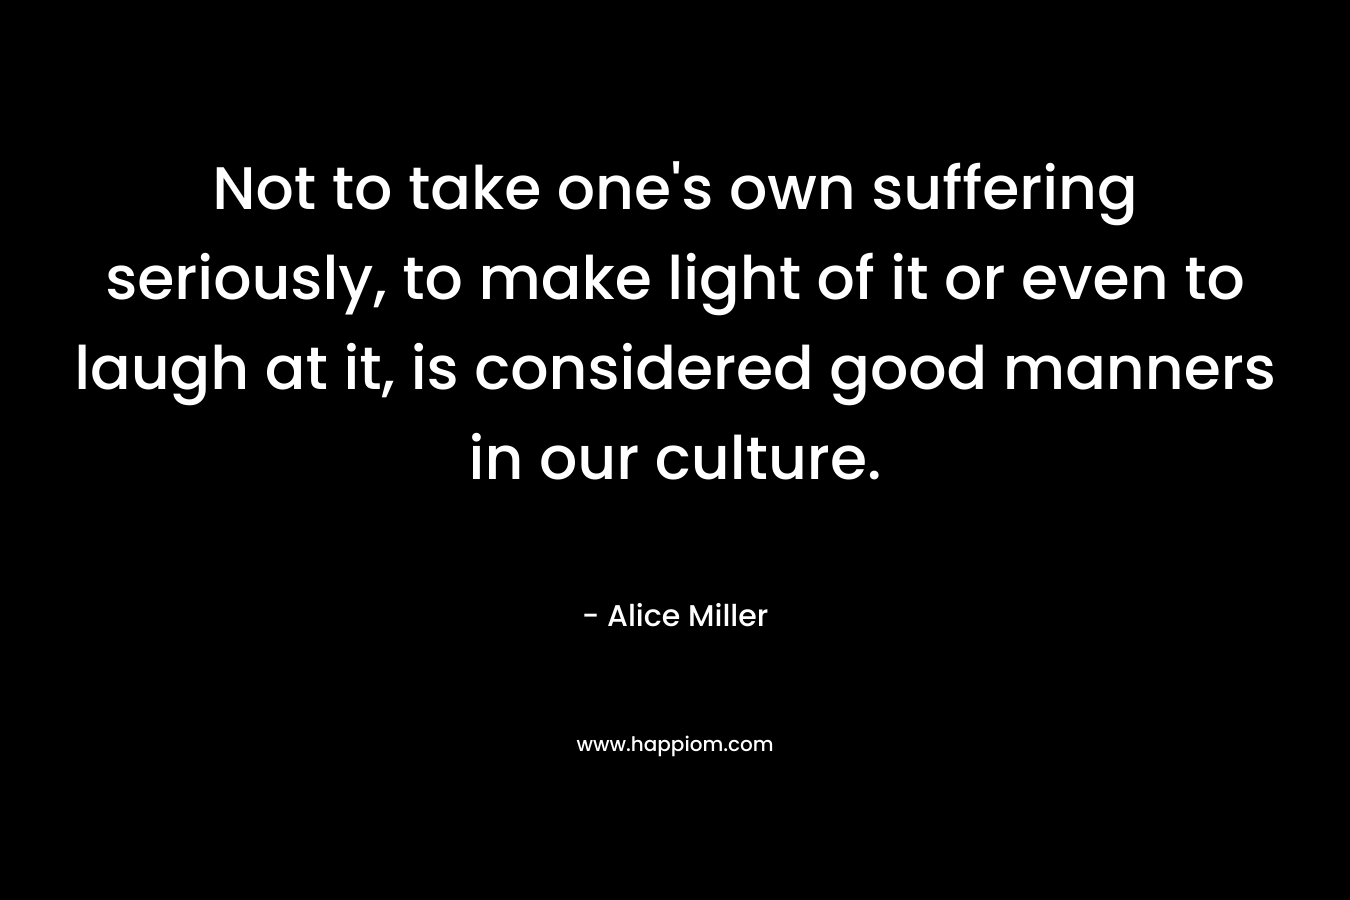 Not to take one's own suffering seriously, to make light of it or even to laugh at it, is considered good manners in our culture.